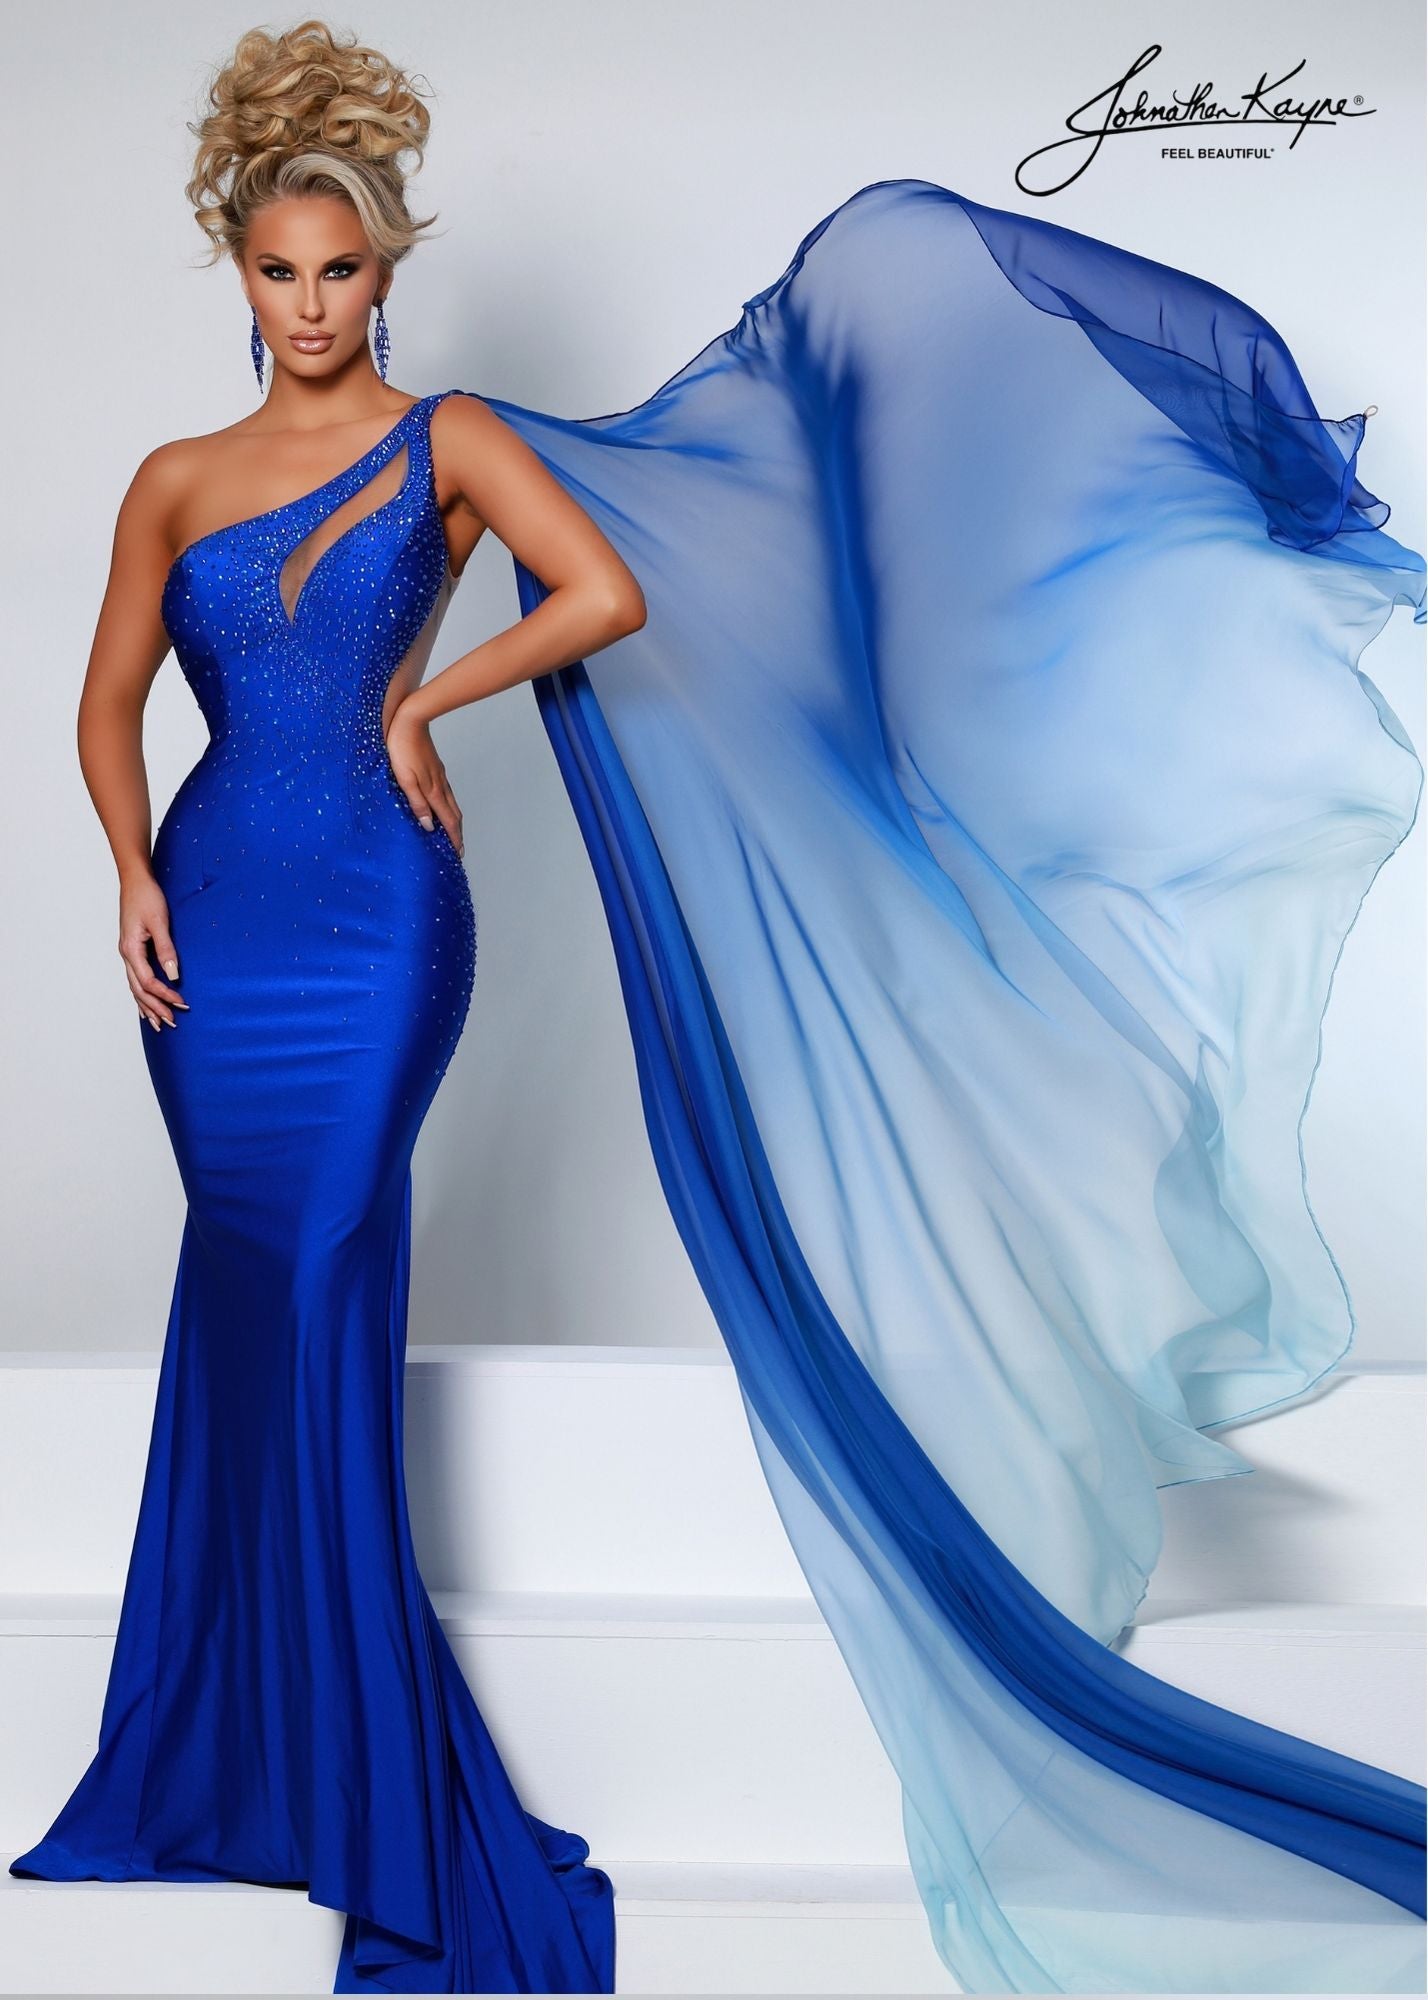 Johnathan Kayne 2516 Long Fitted Crystal embellished jersey One Shoulder Formal Pageant Dress with a detachable Ombre flowing chiffon Cape. This Gown features a keyhole cutout neckline and sheer cutout side corset back.   Sizes: 00, 0, 2, 4, 6, 8, 10, 12, 14, 16  Colors: Black, Purple, Red, Royal